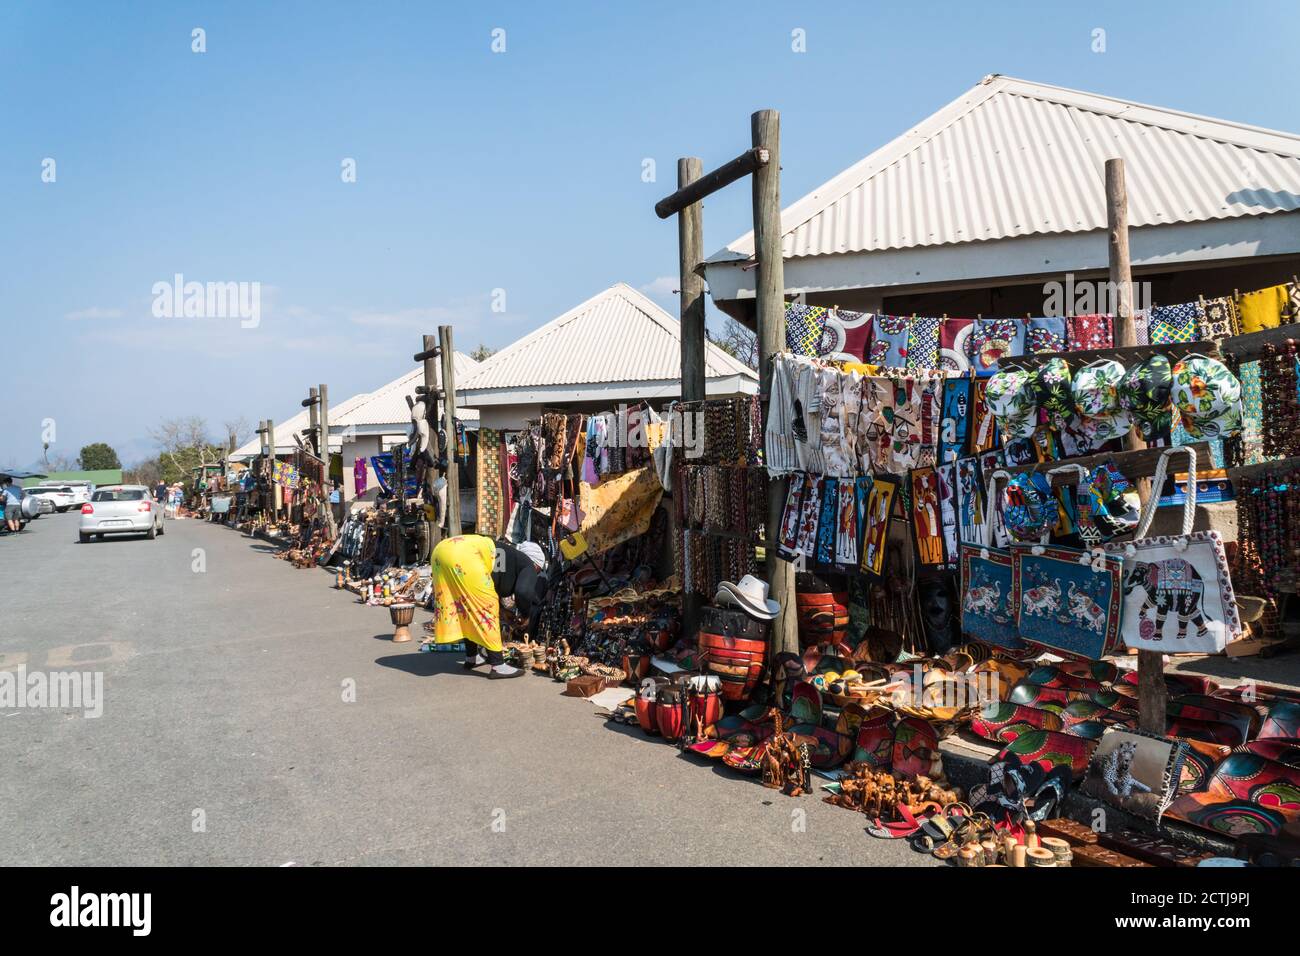 street market stalls displaying traditional African curios, arts and crafts, souvenirs for the tourist trade at God's Window, Mpumalanga, South Africa Stock Photo